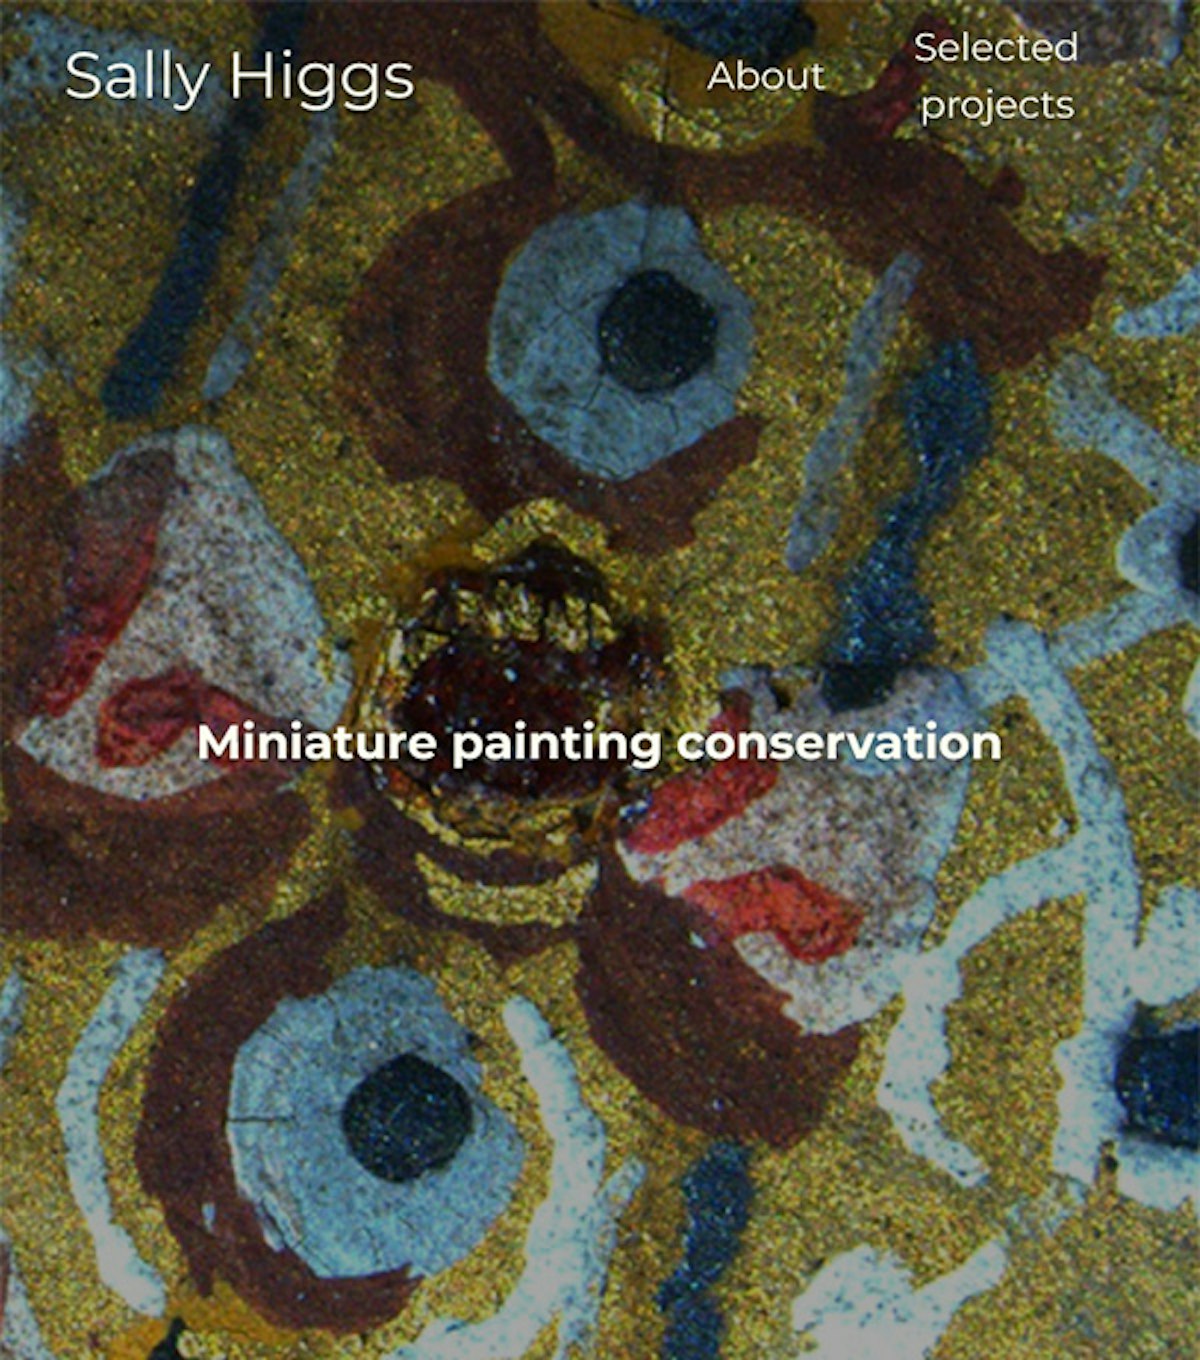 Painting with 'Miniature painting conservation' overlaid as screenshot of landing page